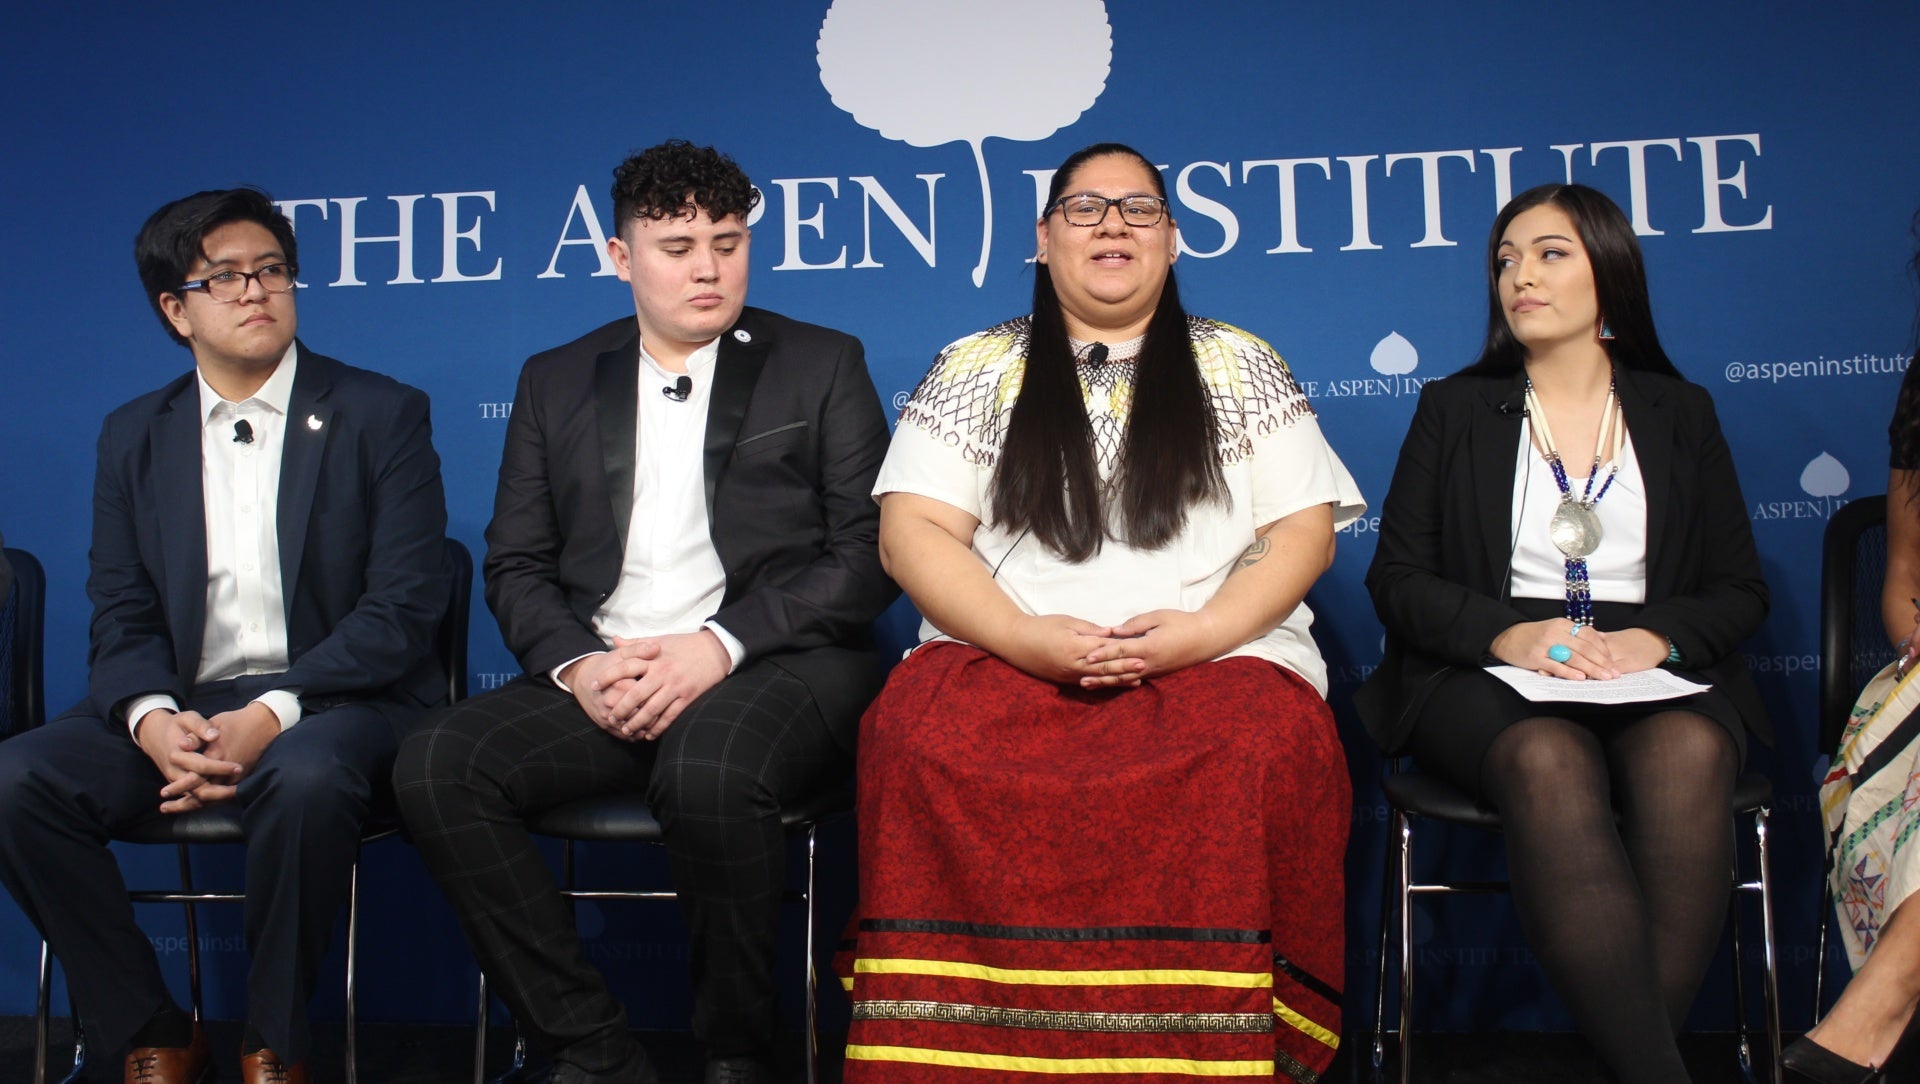 Native Youth leaders speaking at CNAY's event for the release of the 2019 State of Native Youth Report.